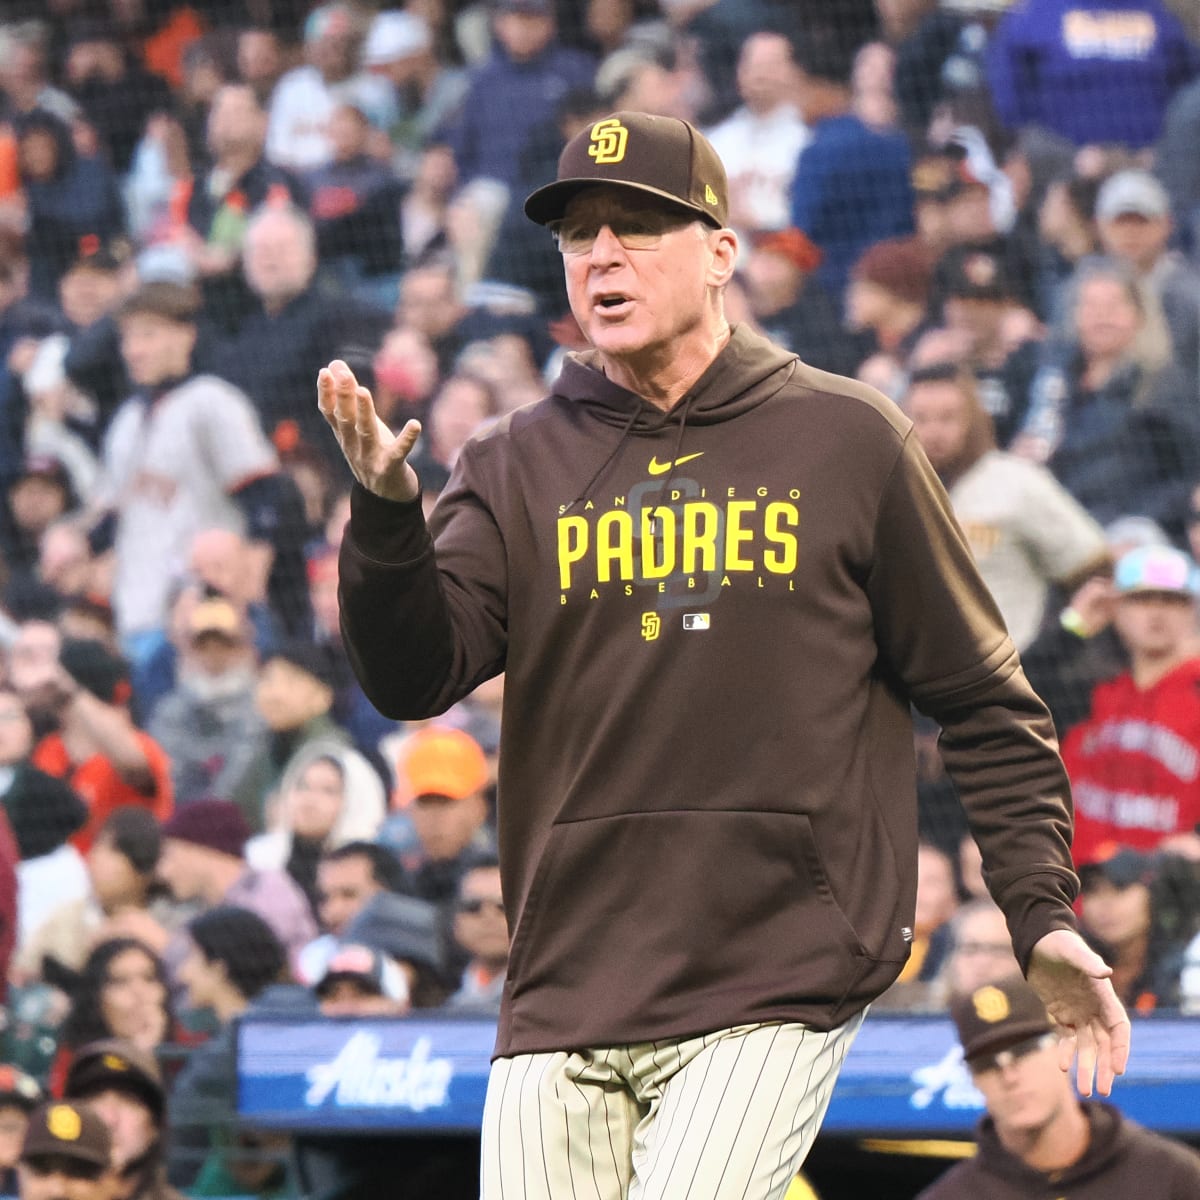 Padres take offense to claim they're wearing the ugliest uniforms